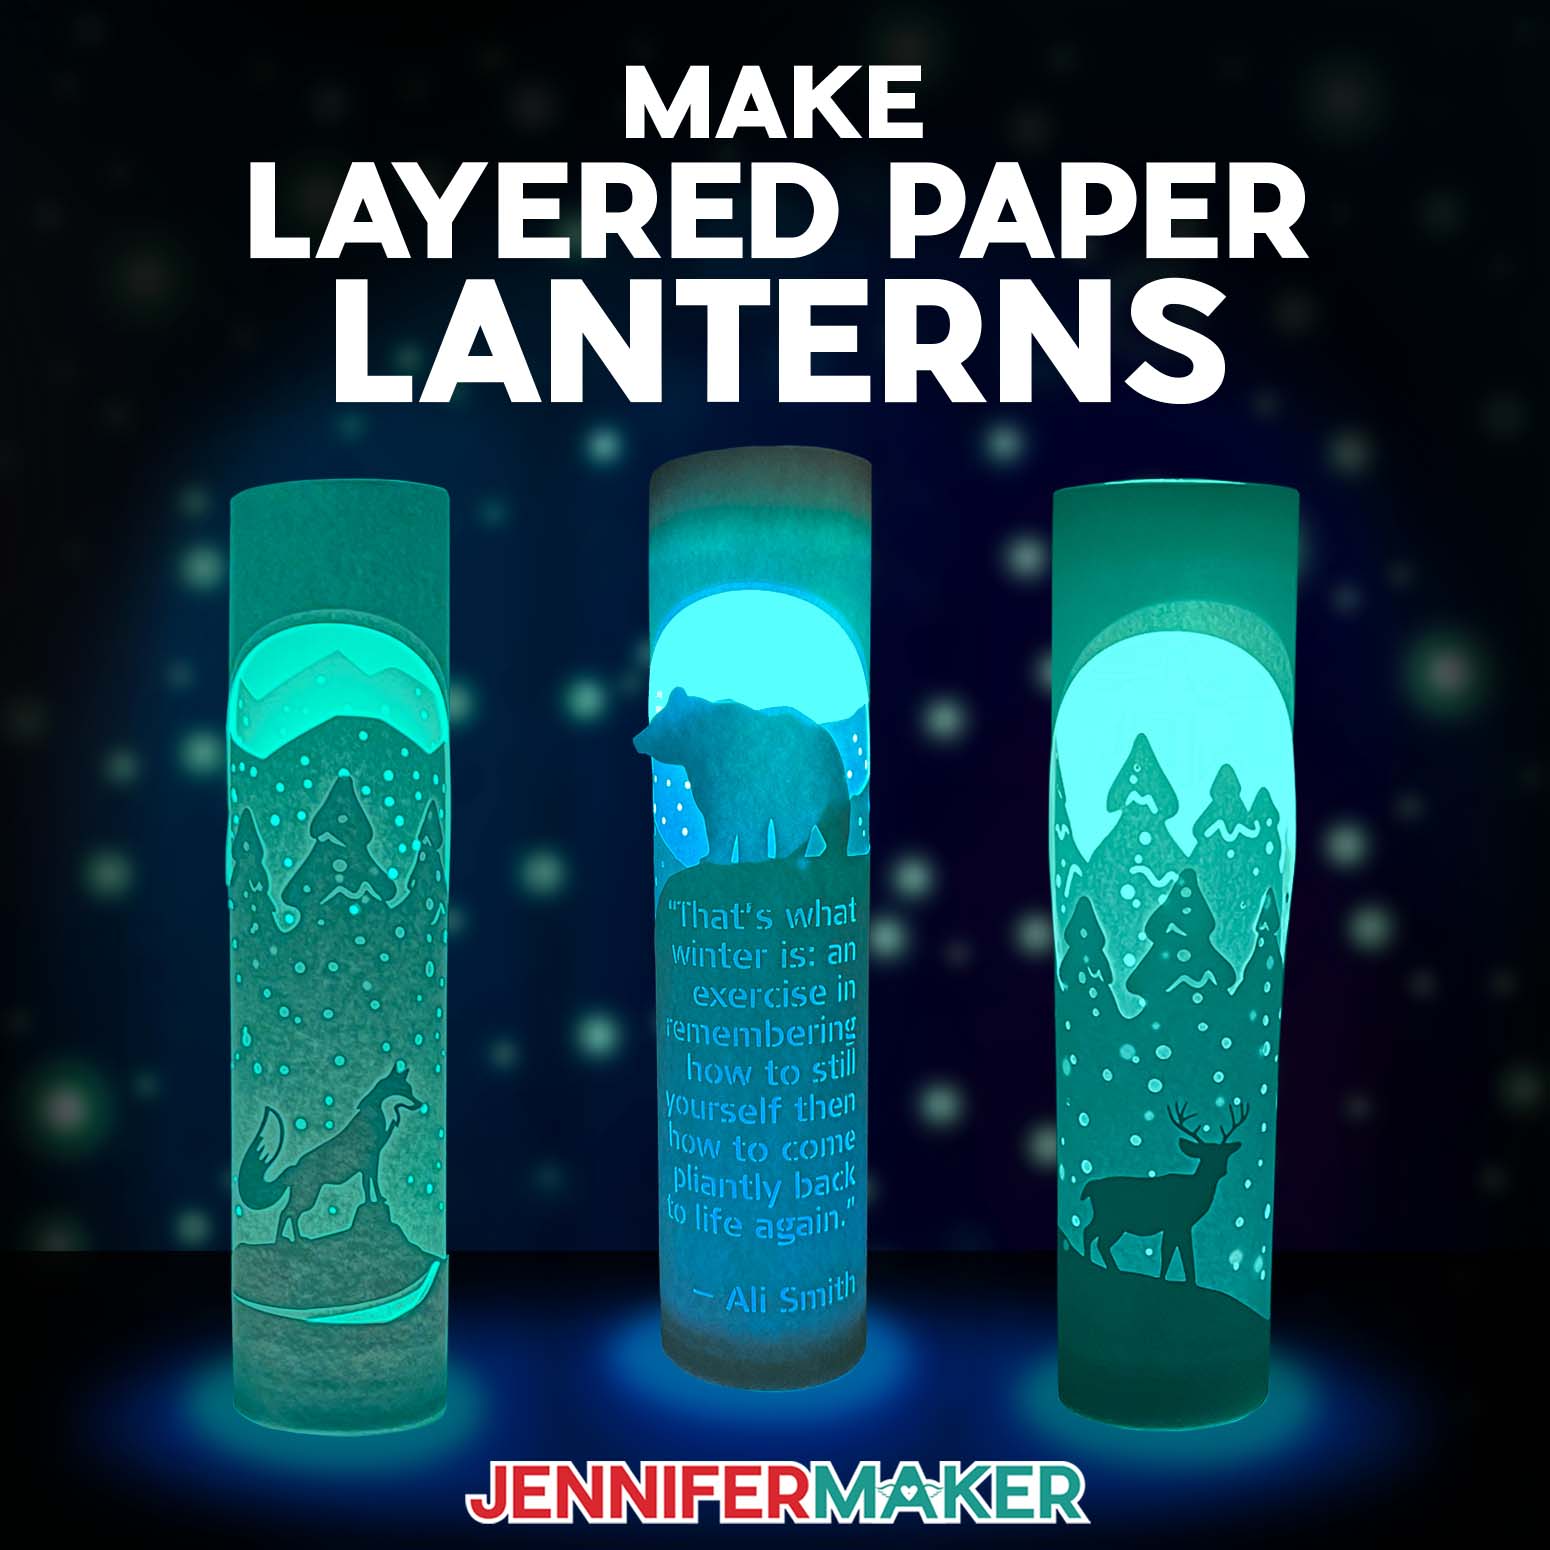 Learn how to make layered paper lanterns with lights with Jennifer Maker's tutorial! Three illuminated paper lanterns with a fox, bear, and deer glow against a starry background.